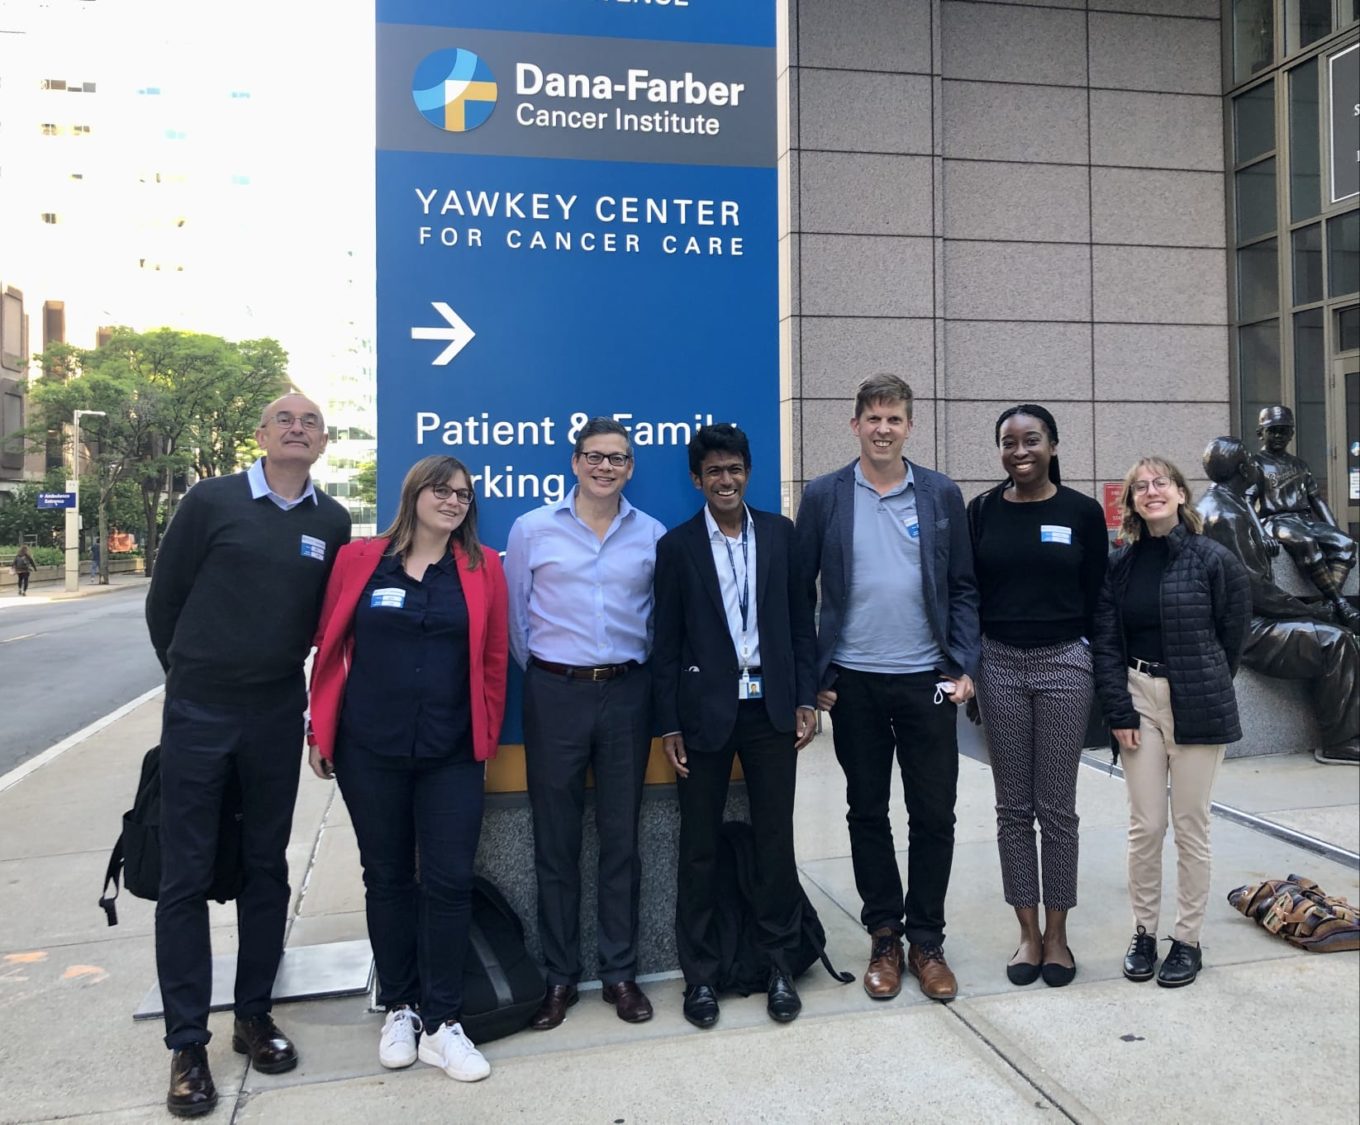 The PCR and Dana-Farber Cancer Institute research teams. From left to right: Boris Cooper, Naomi Elster, Timothy Rebbeck, Hari Iyer, Oliver Kemp, Denise Karikari, and Erica Ruggiero.